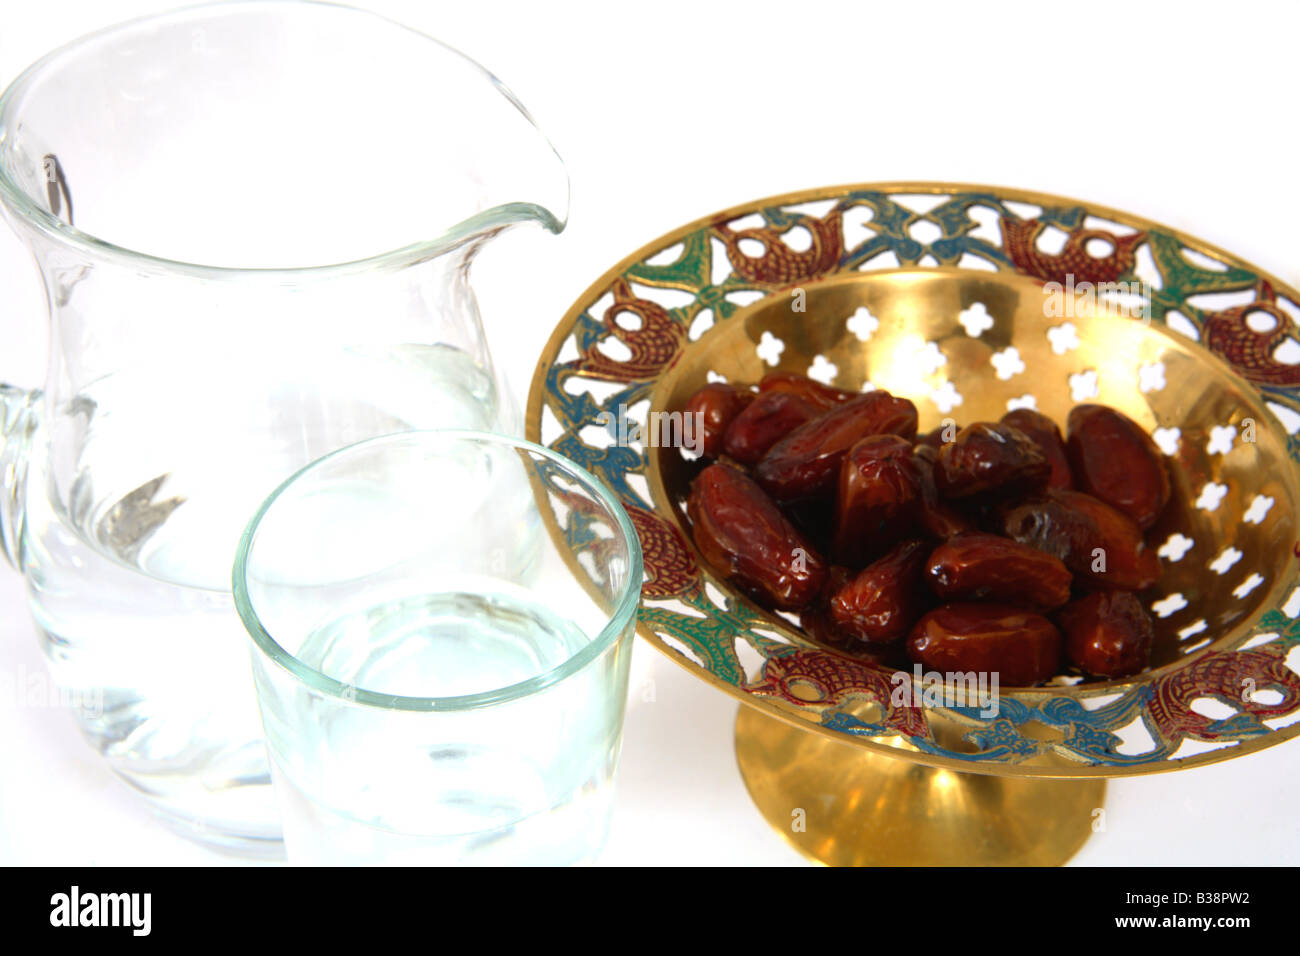 A bowl of dates and a jug and glass of water Stock Photo